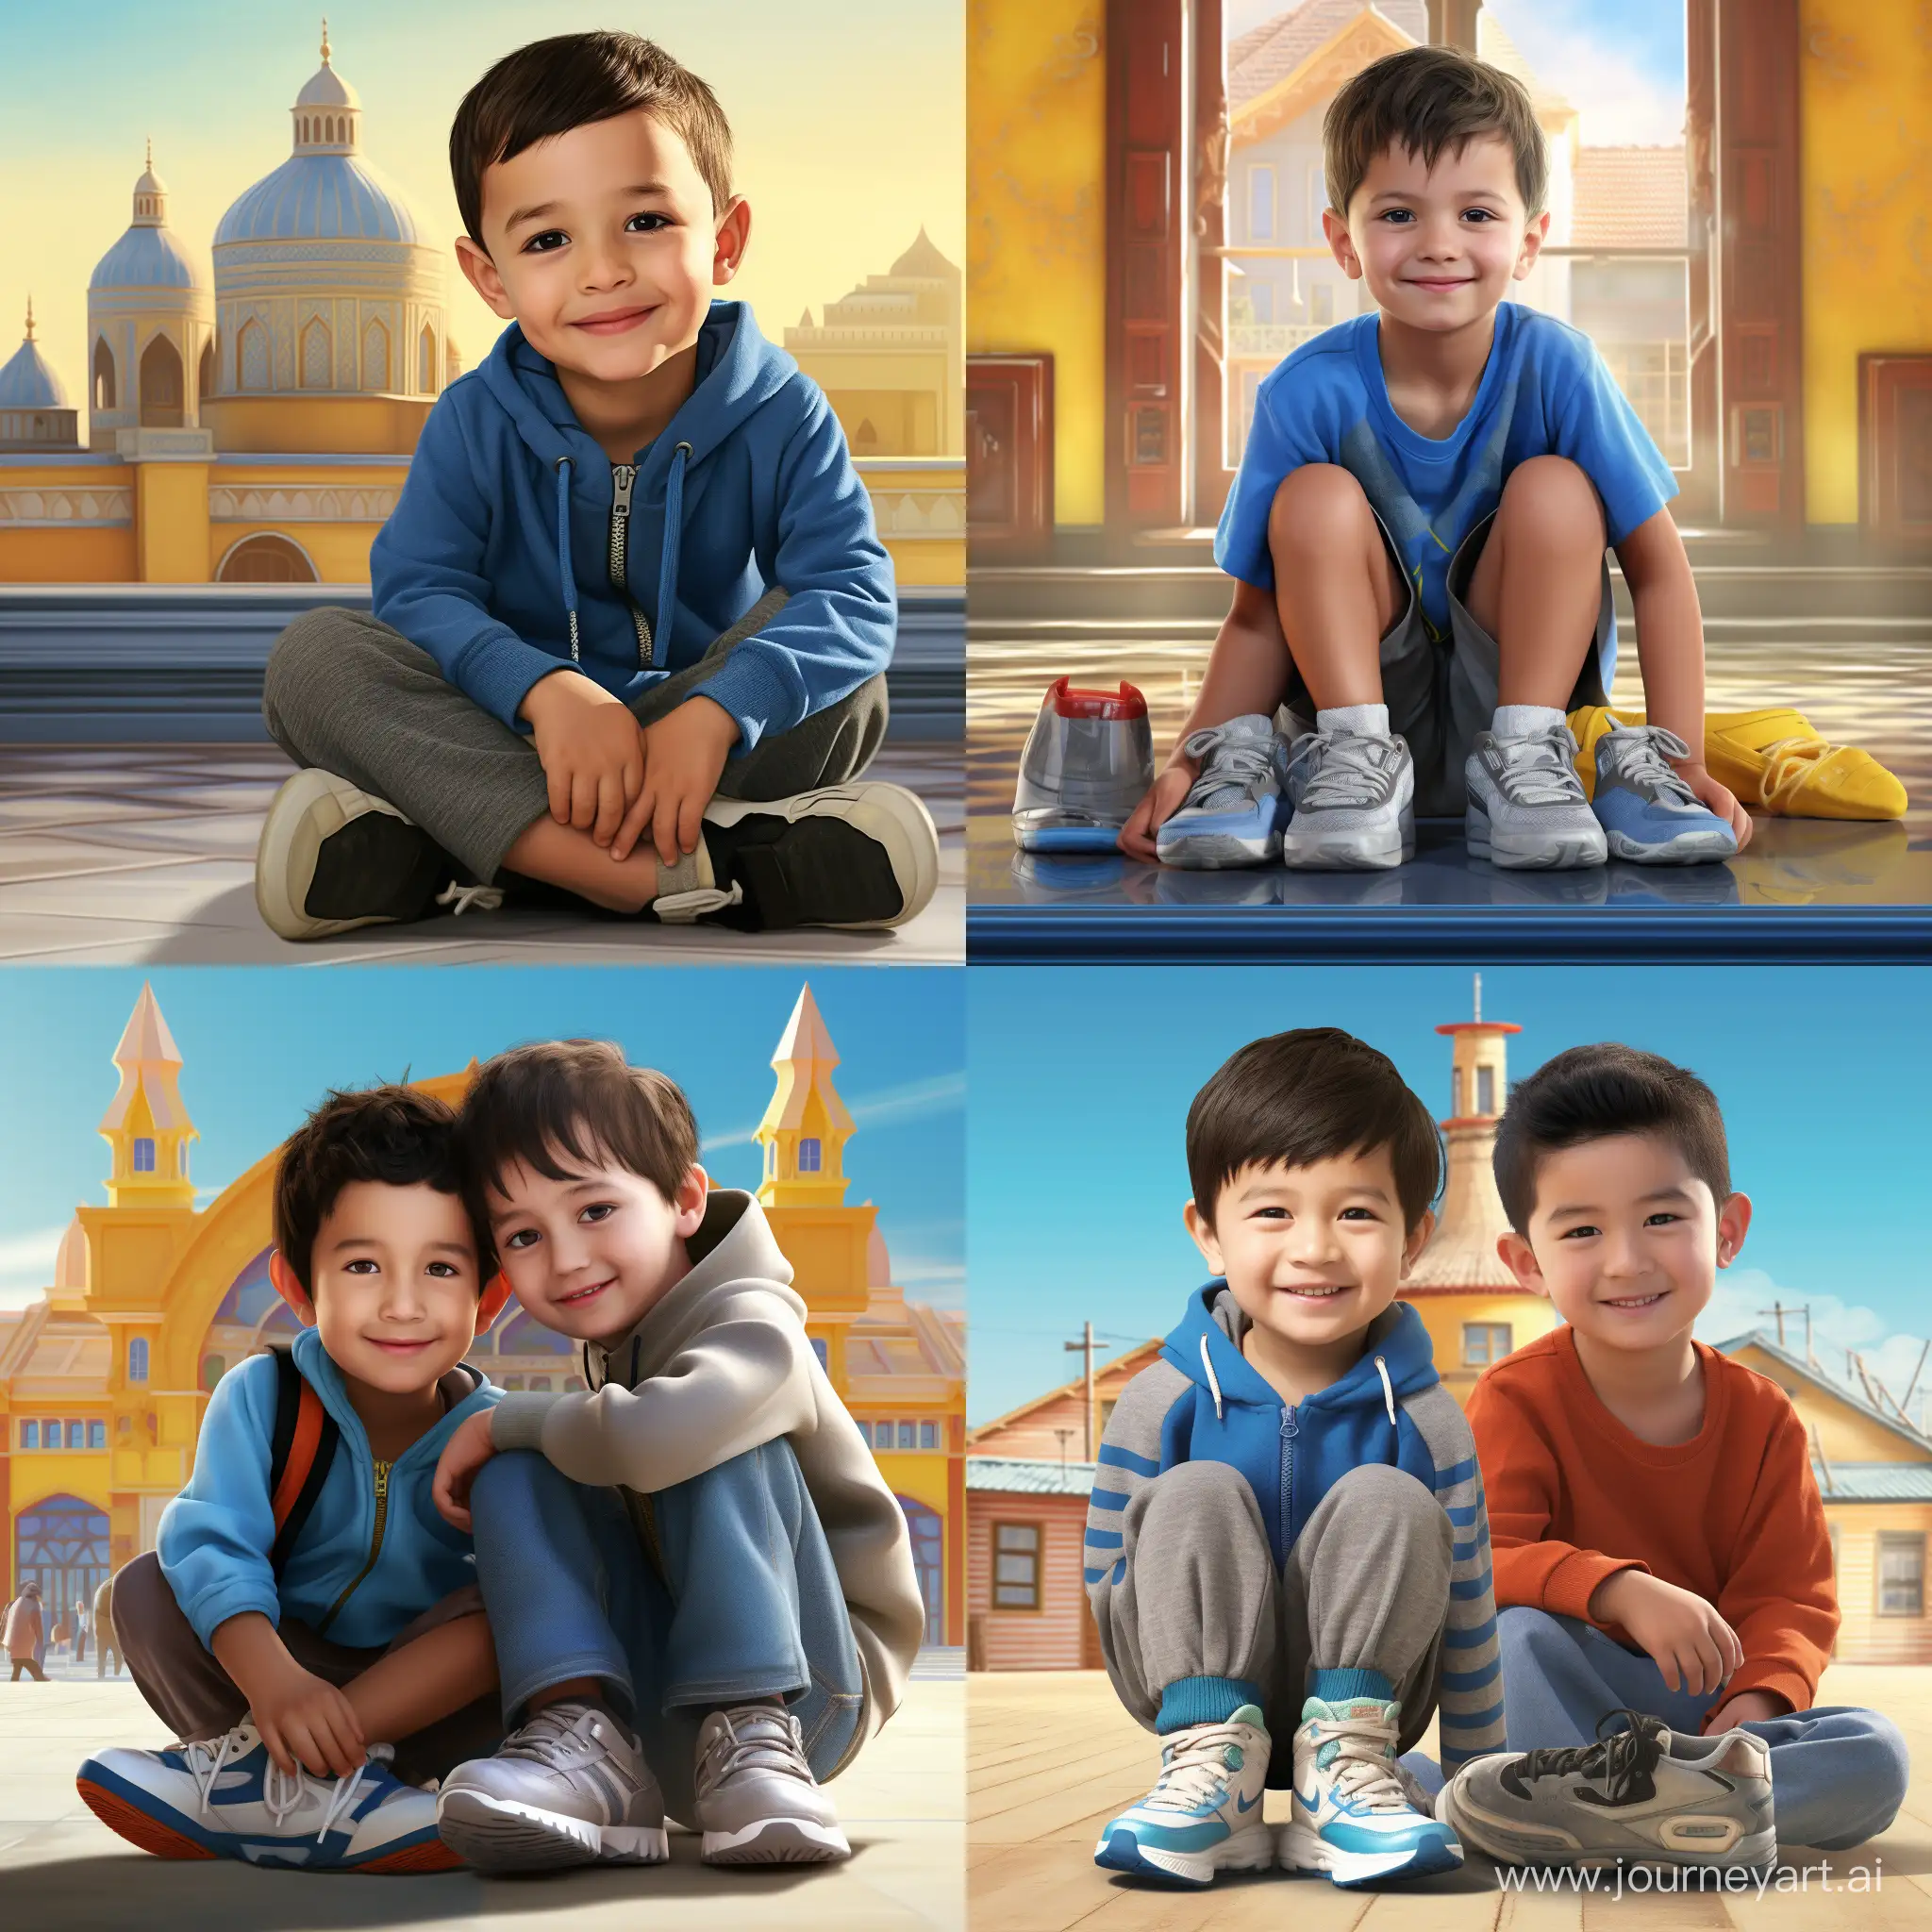 A realistic 3D image of a cute 6 years old boy and his 2 years old baby brother big eyes smiling and wearing a bright blue hoodie with a yellow "mohamad" and "mahan" text on the front, wearing sneakers, A building in Uzbekistan in the background. soft light reflection